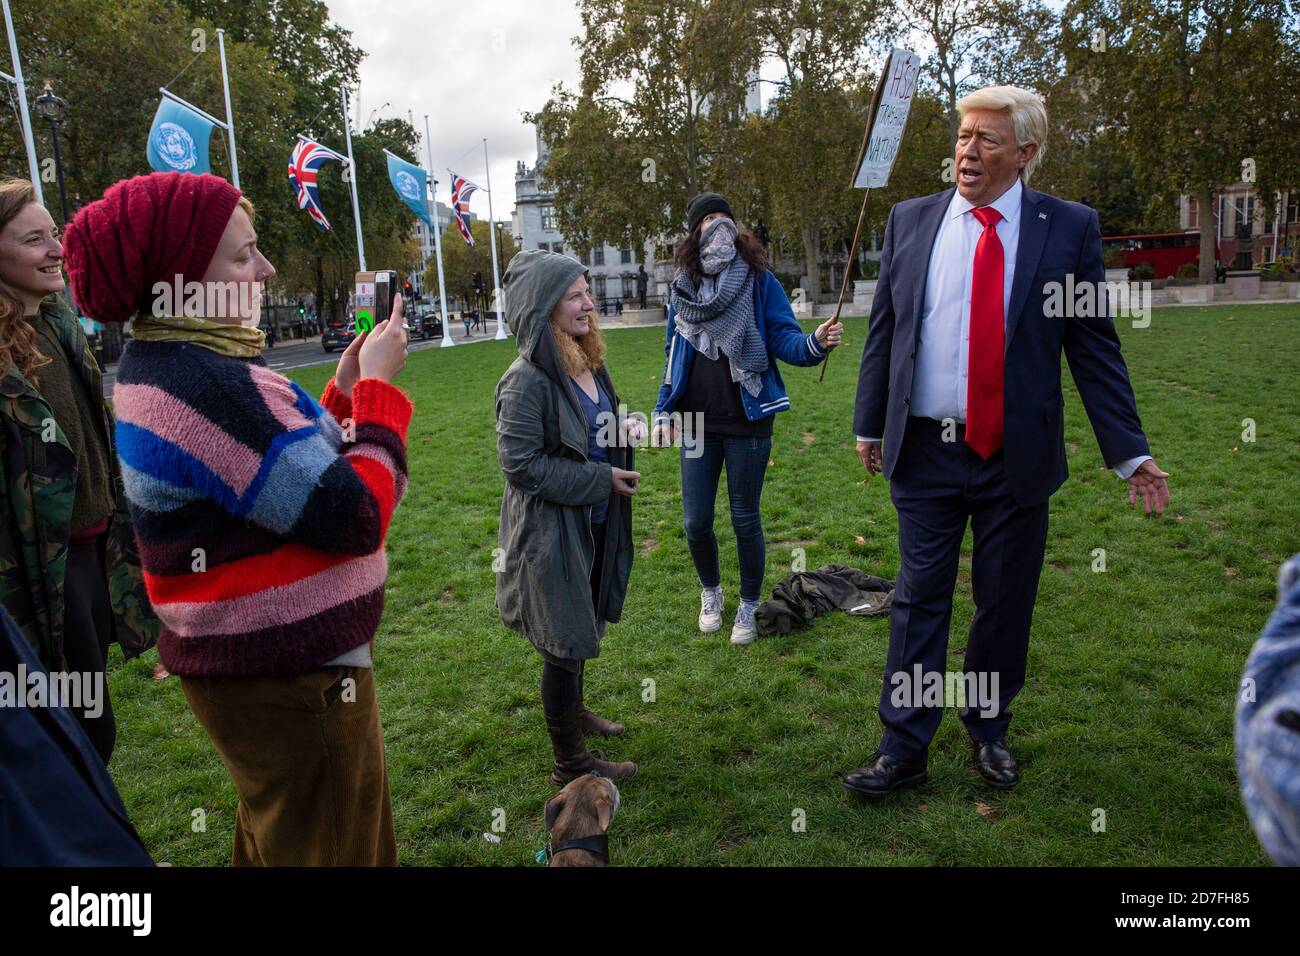 London, UK. 22nd Oct 2020. London, UK. 22nd Oct 2020. Donald Trump, President of the United States of America (look-a-like) drops into Parliament Square, London, England, UK. 22nd Oct, 2020. Credit: Jeff Gilbert/Alamy Live News Stock Photo